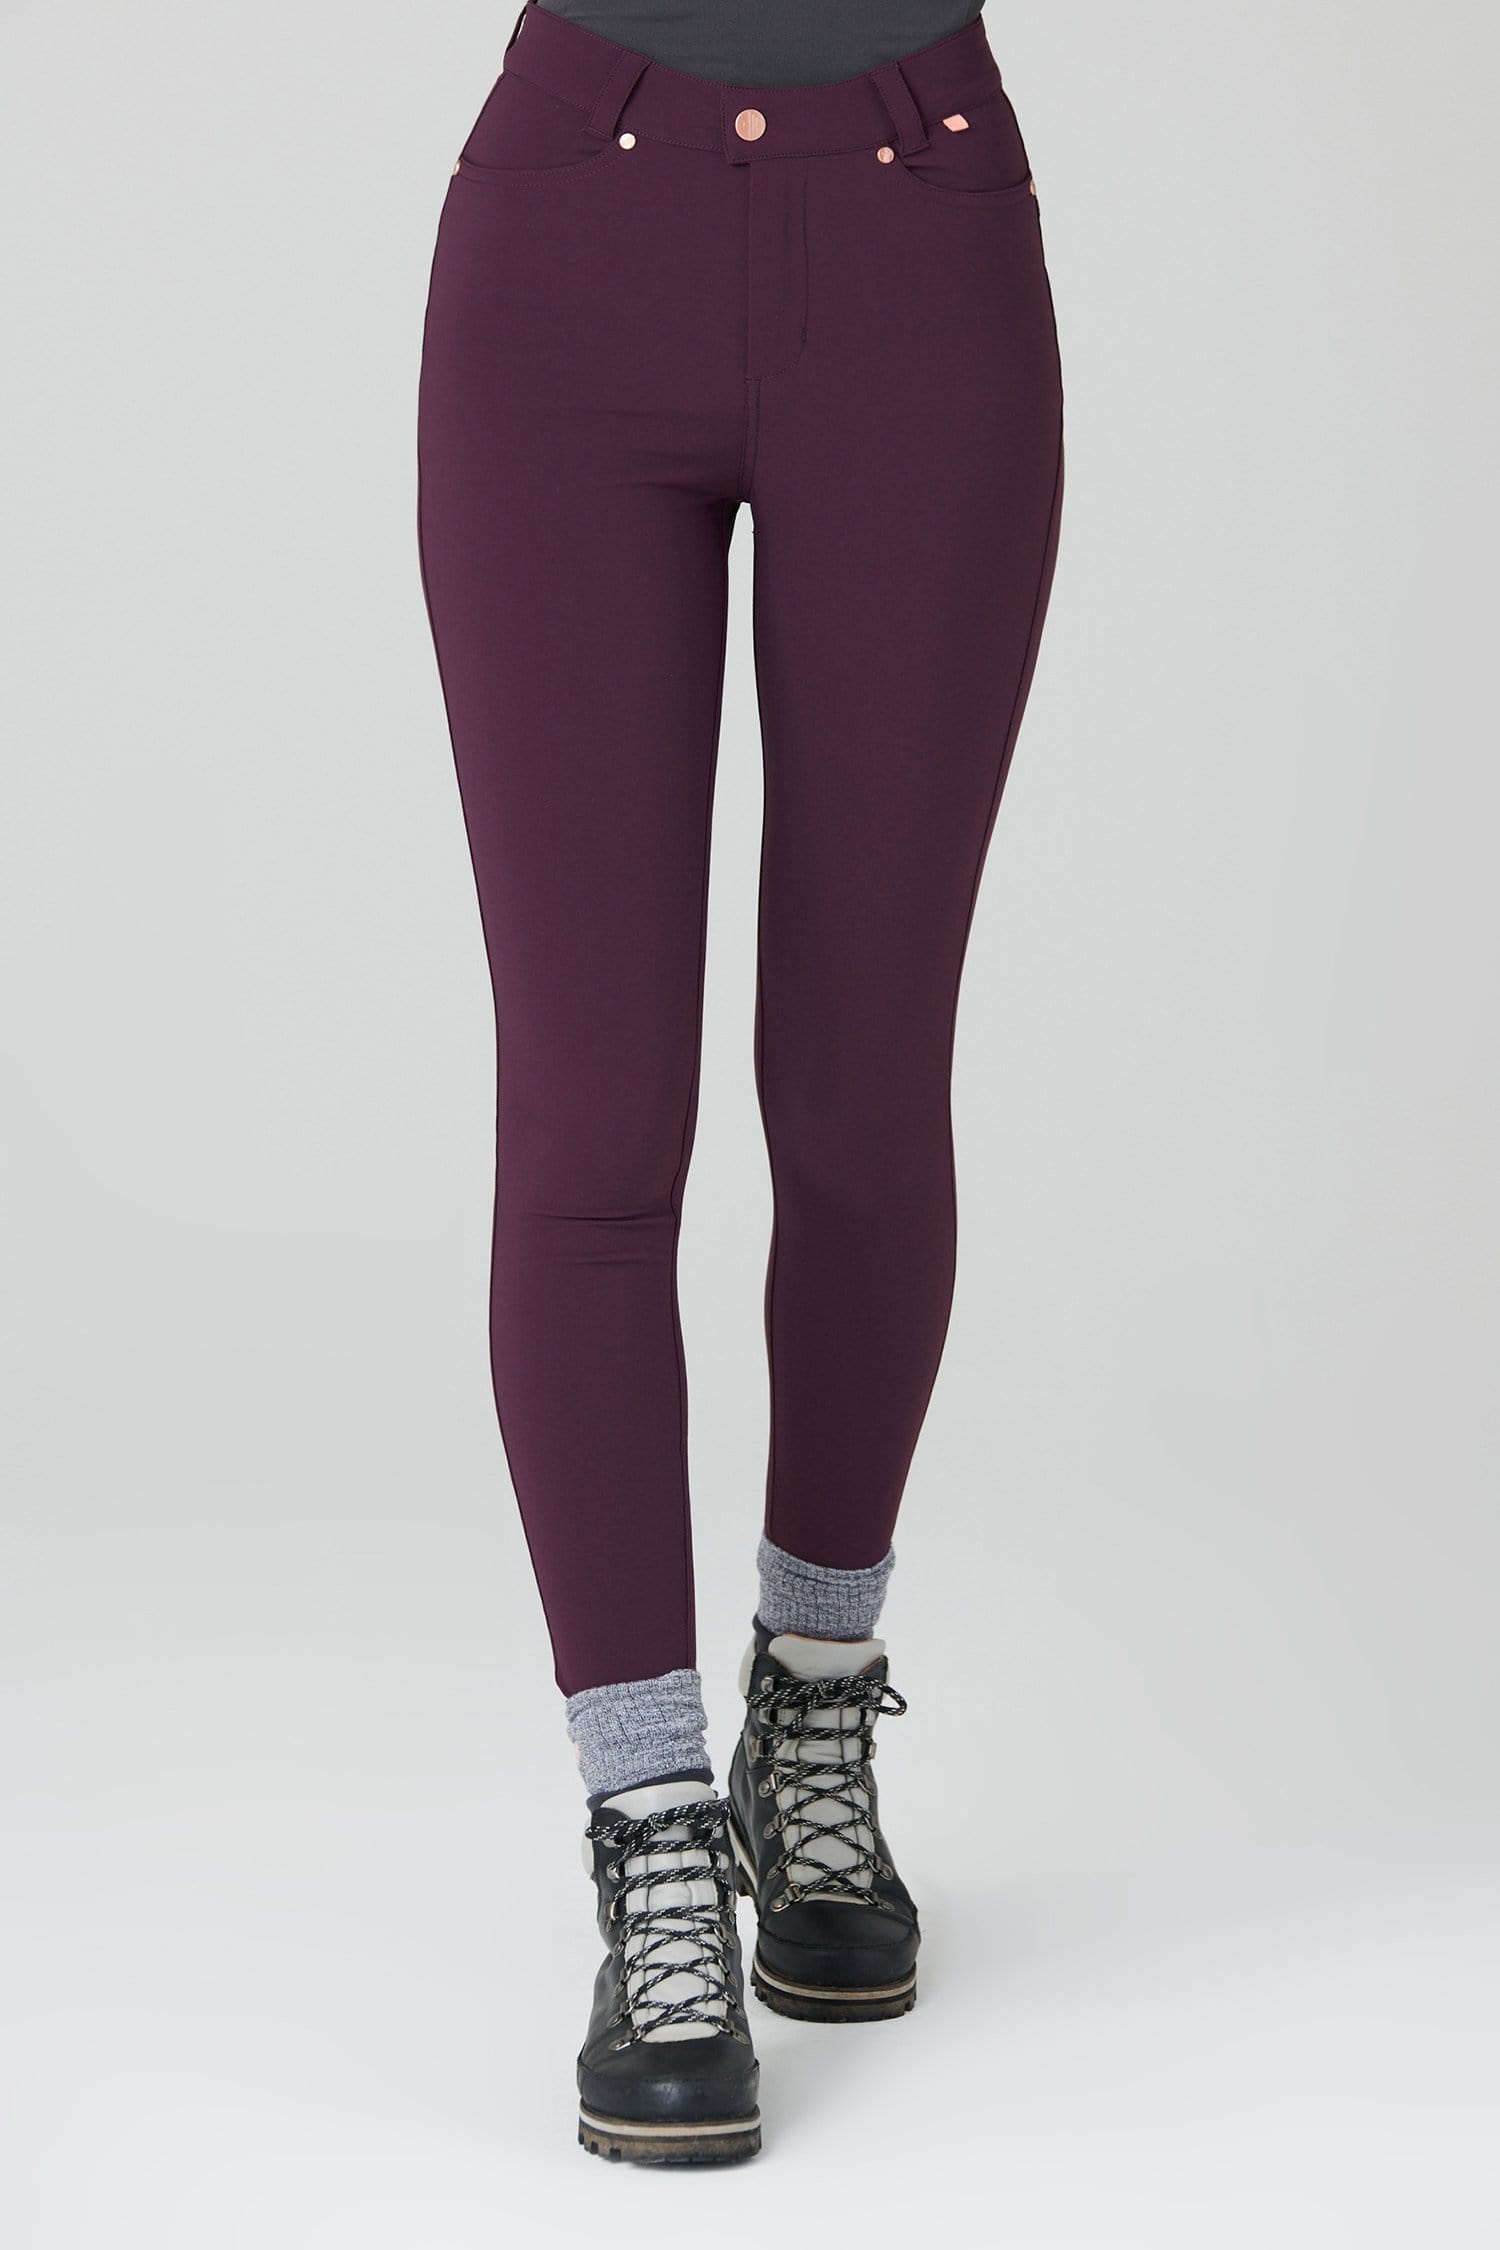 Max Stretch Skinny Outdoor Trousers - Aubergine - 34p / Uk16 - Womens - Acai Outdoorwear